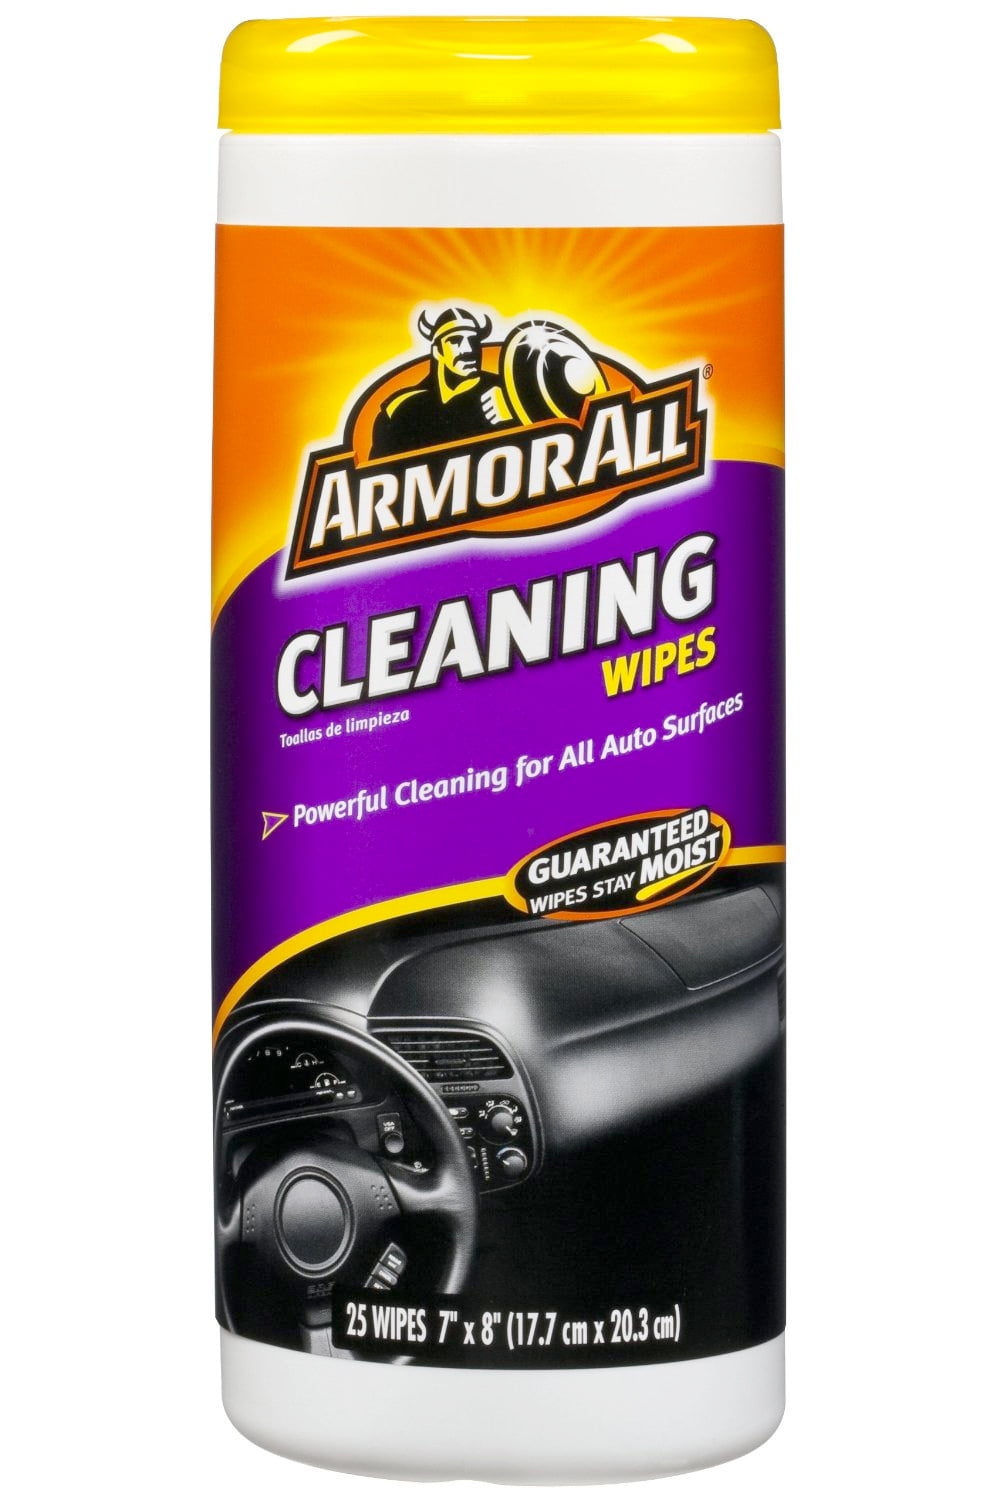 Armour All wipes under the hood :)